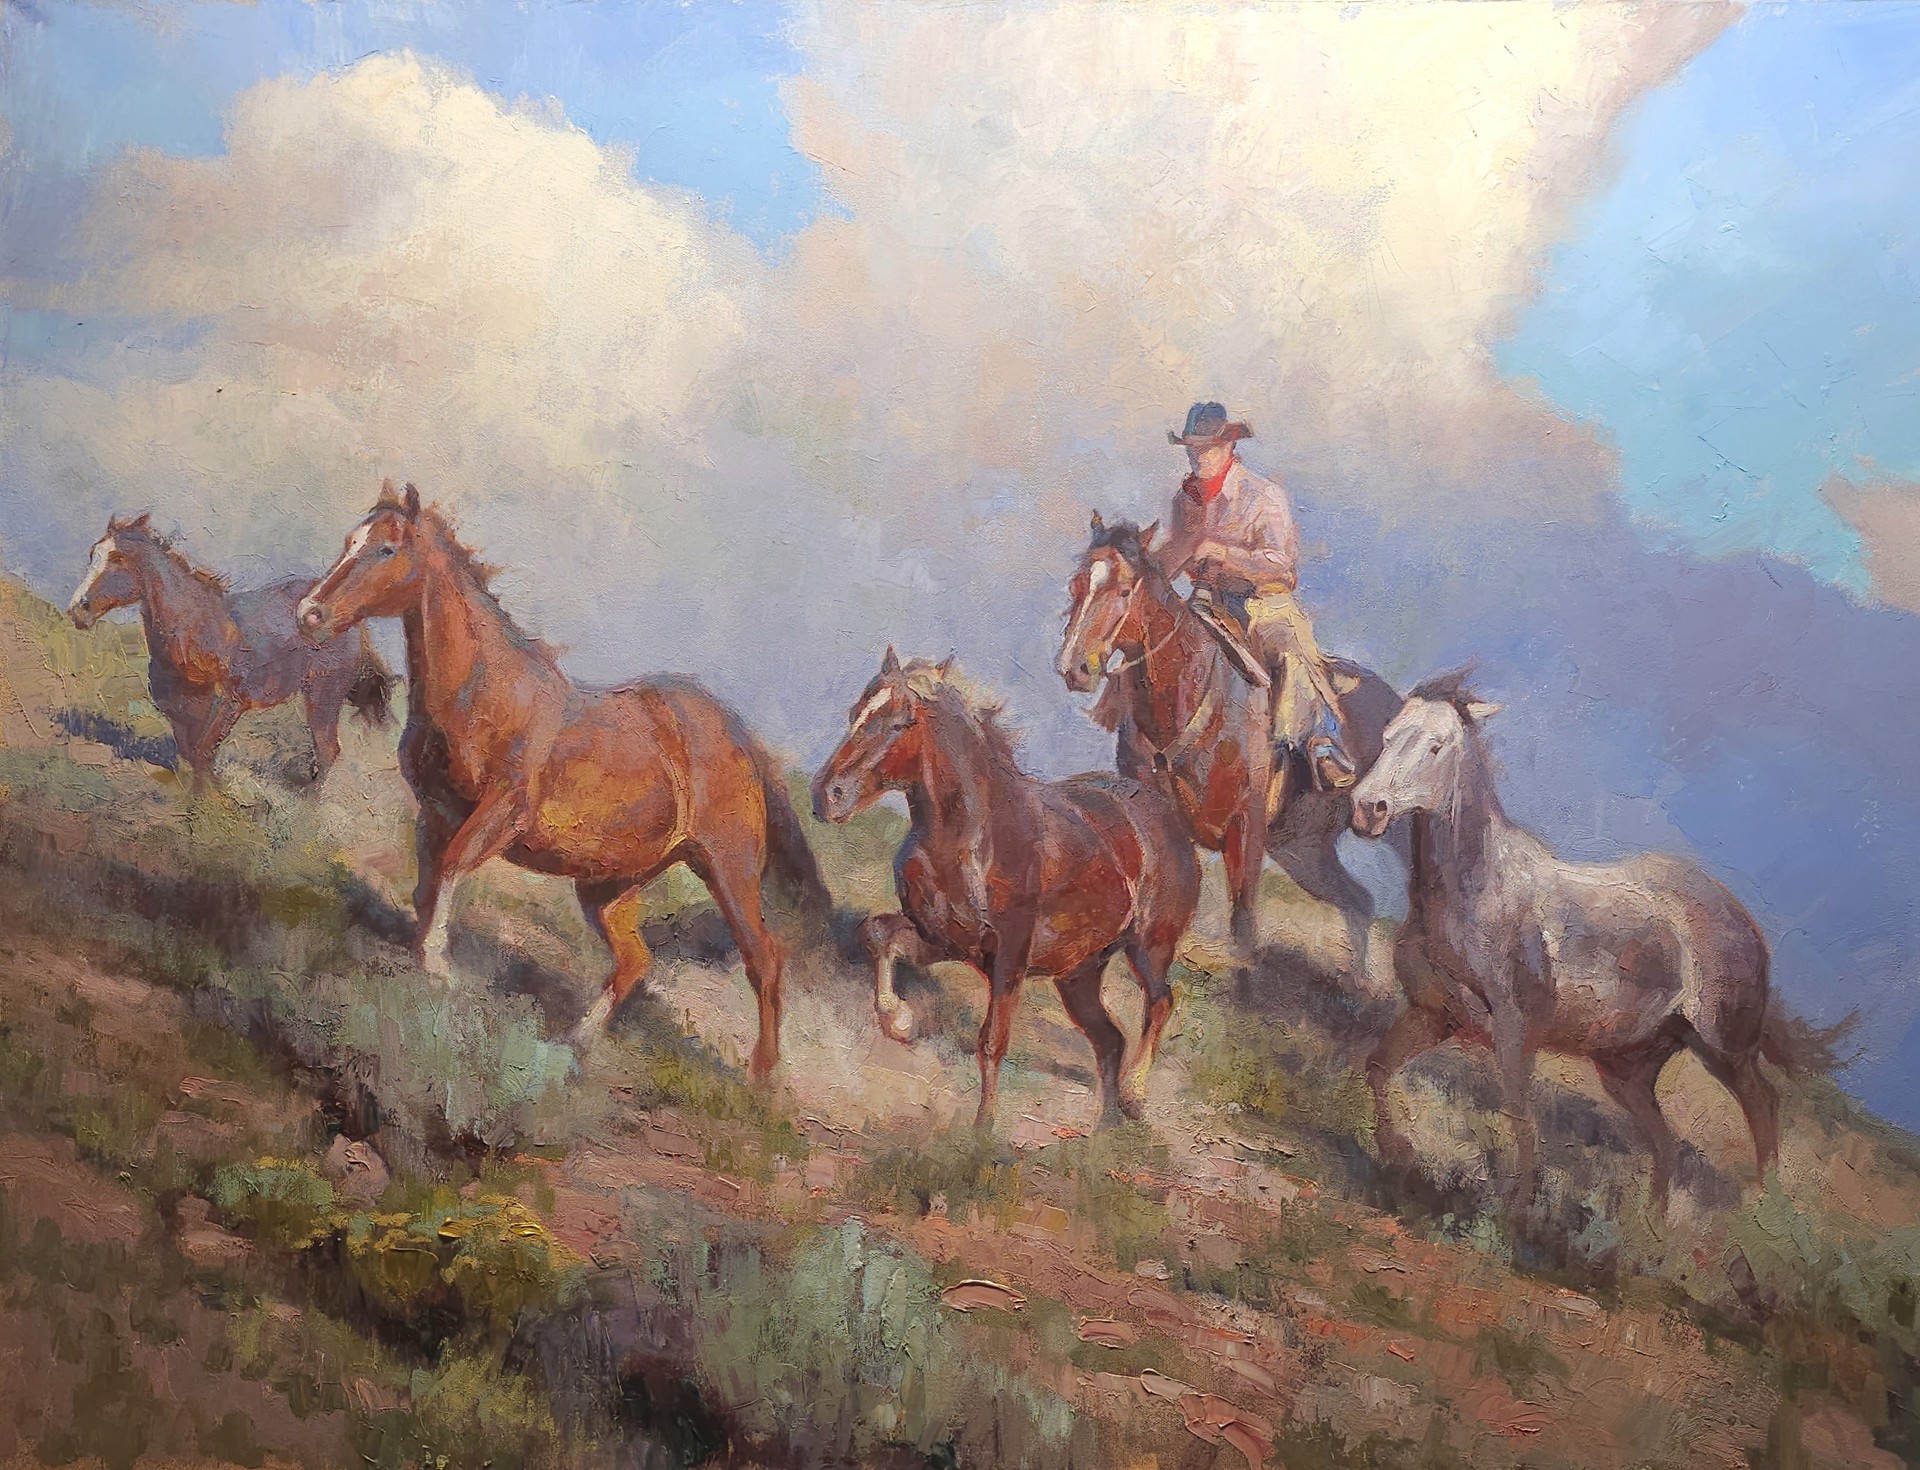 Bringing in the Rough Stock by Rick Kennington